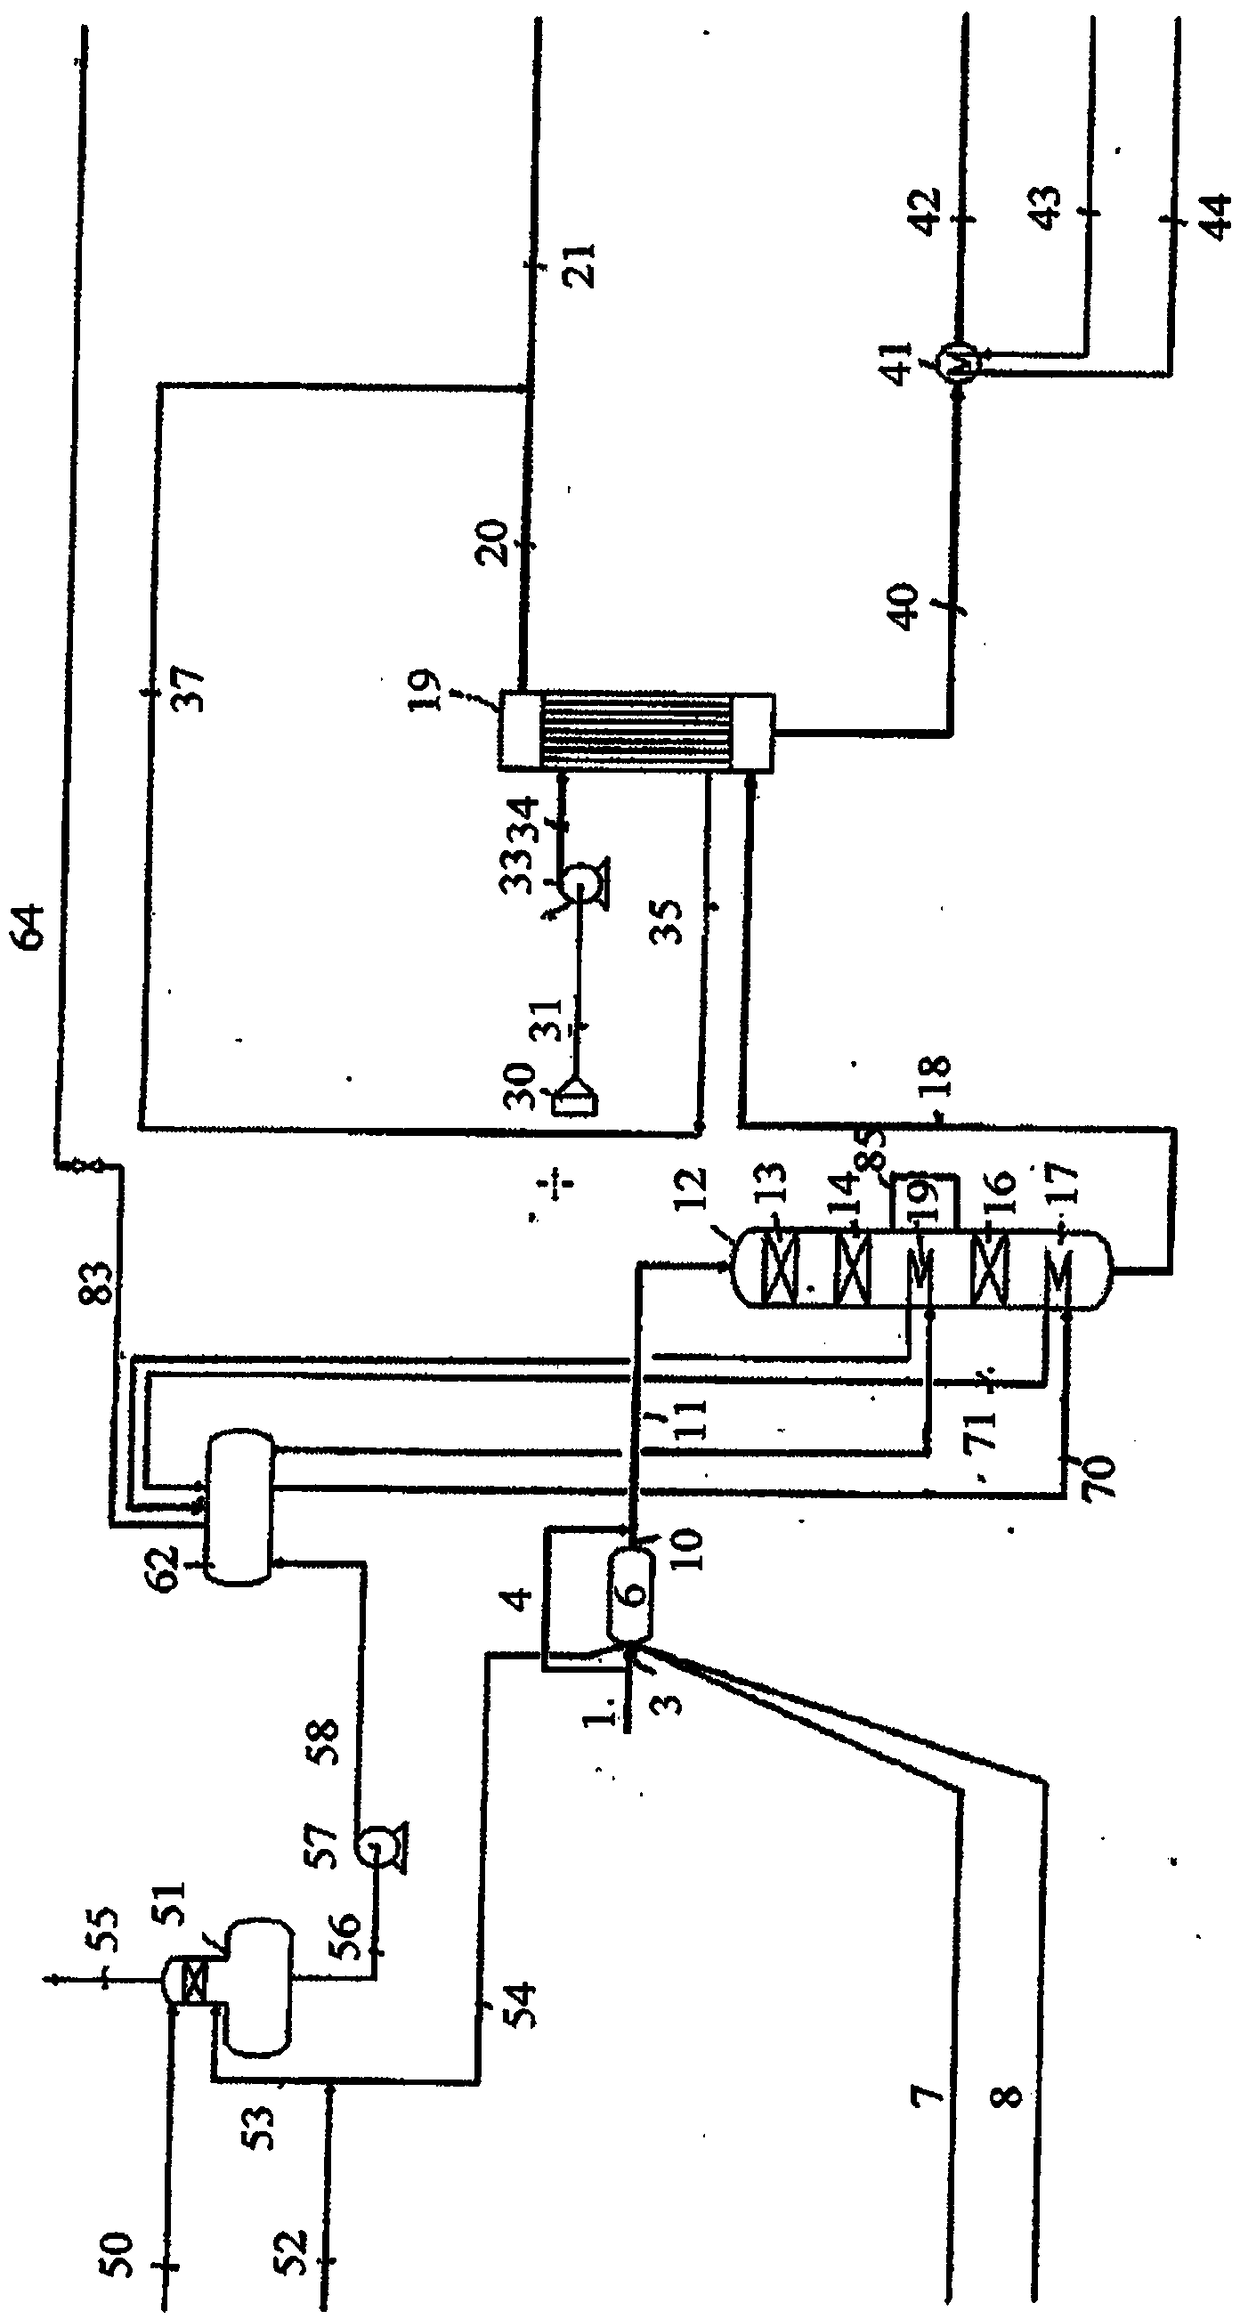 A method for inter-bed cooling in wet gas sulfuric acid plants